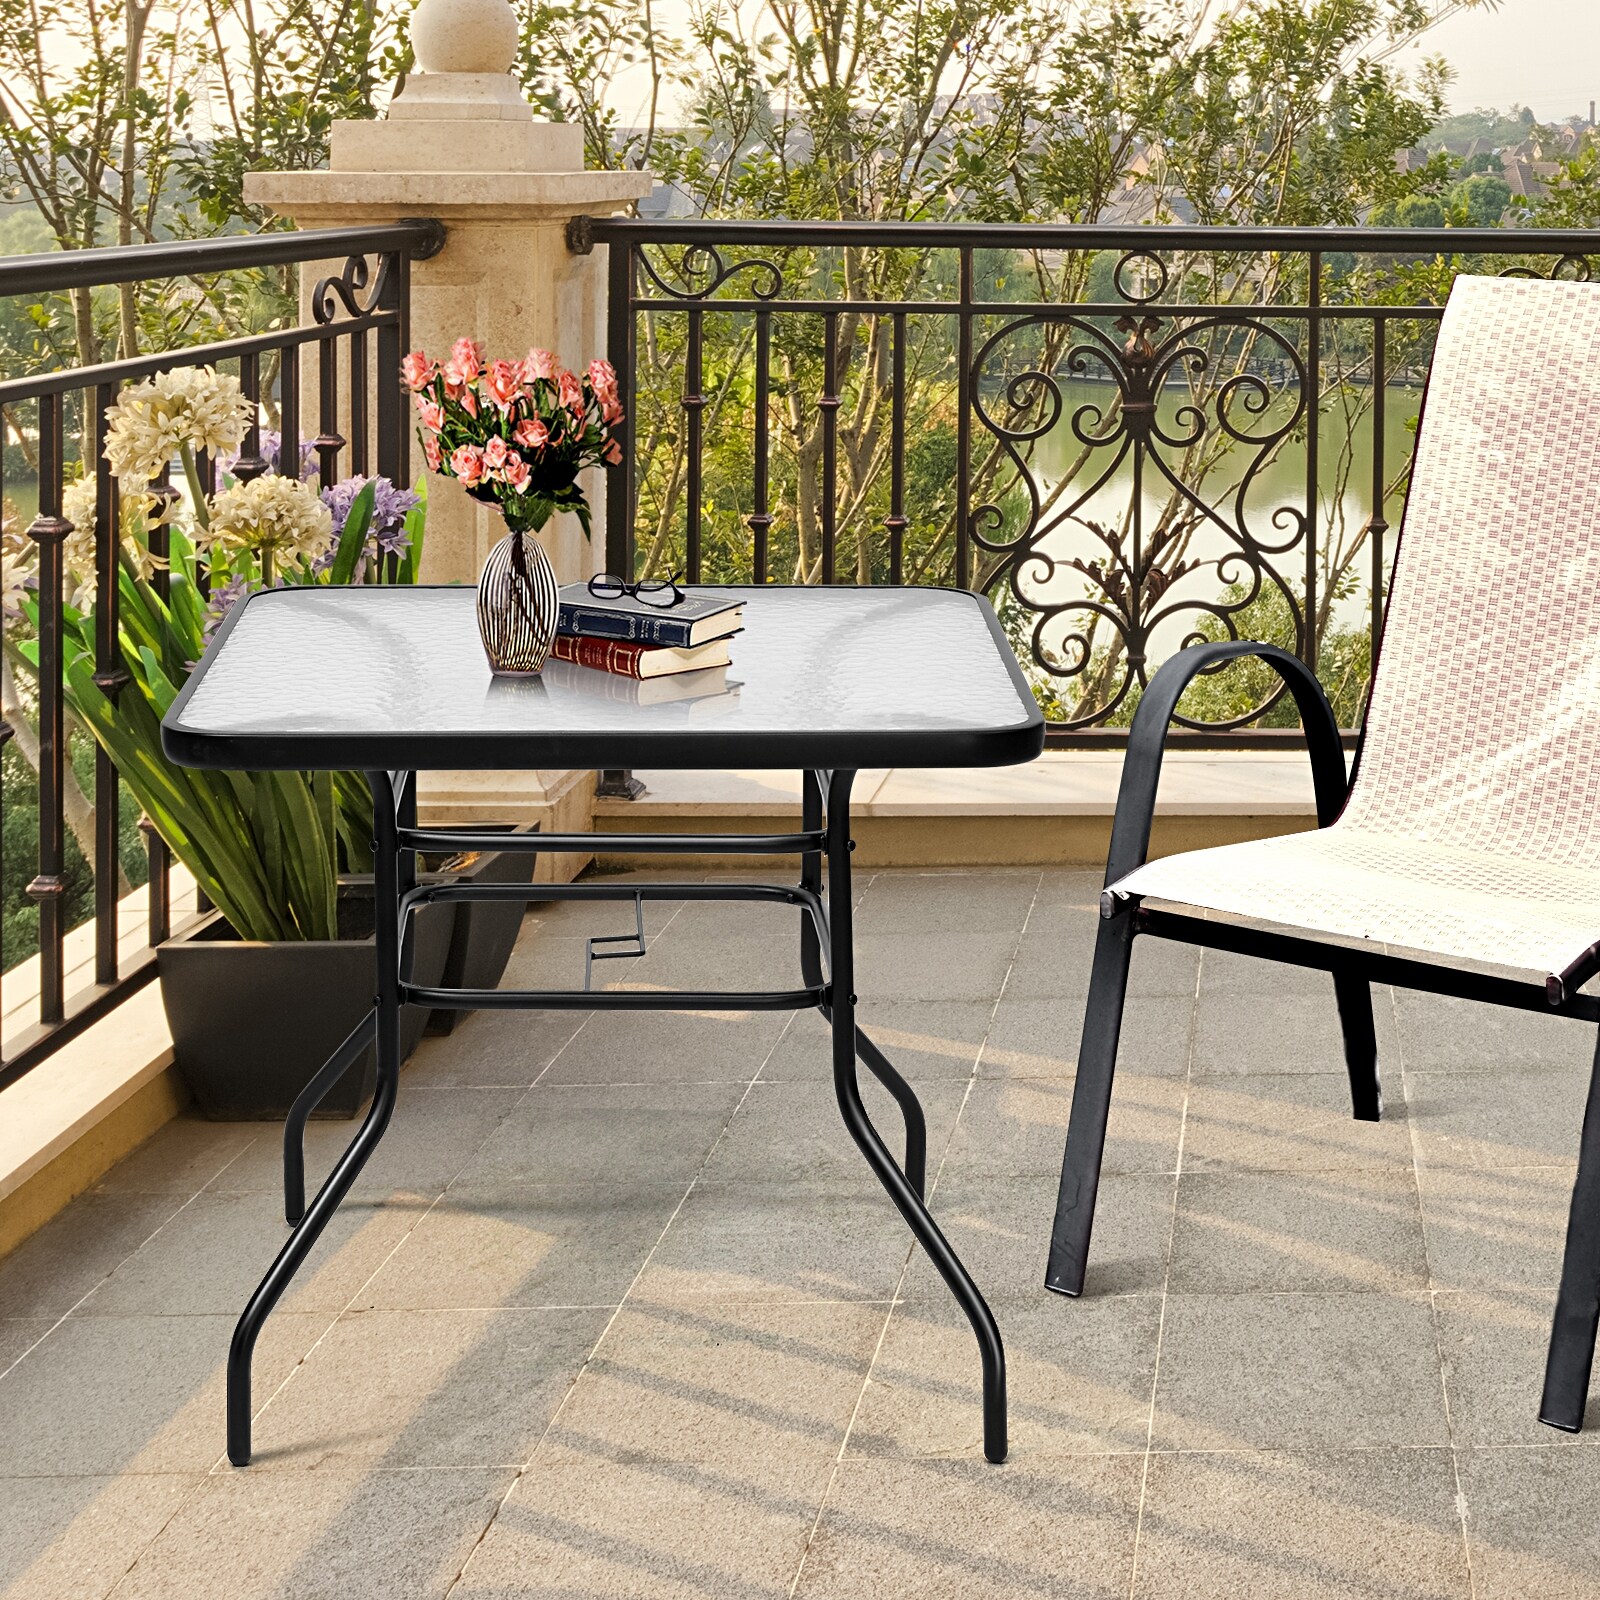 Details about   32" x 32" Square Blue Aluminum Patio Table with Umbrella Hole For Outdoor Use 